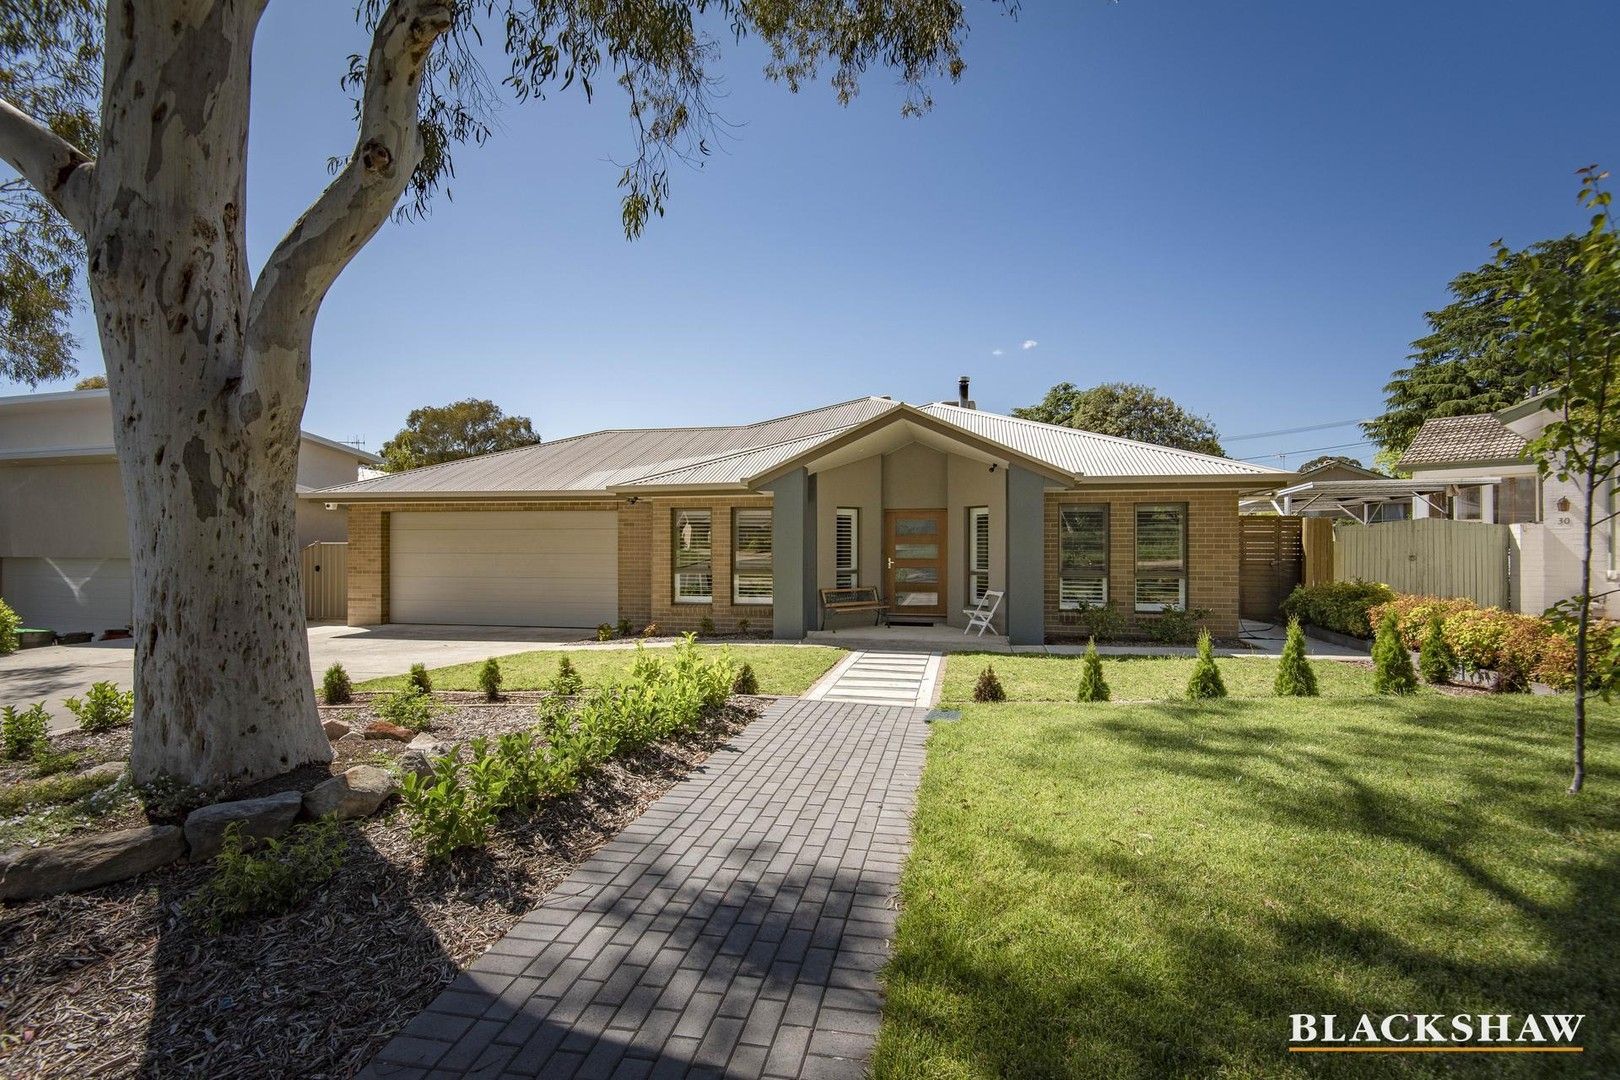 4 bedrooms House in 32 Charteris Crescent CHIFLEY ACT, 2606